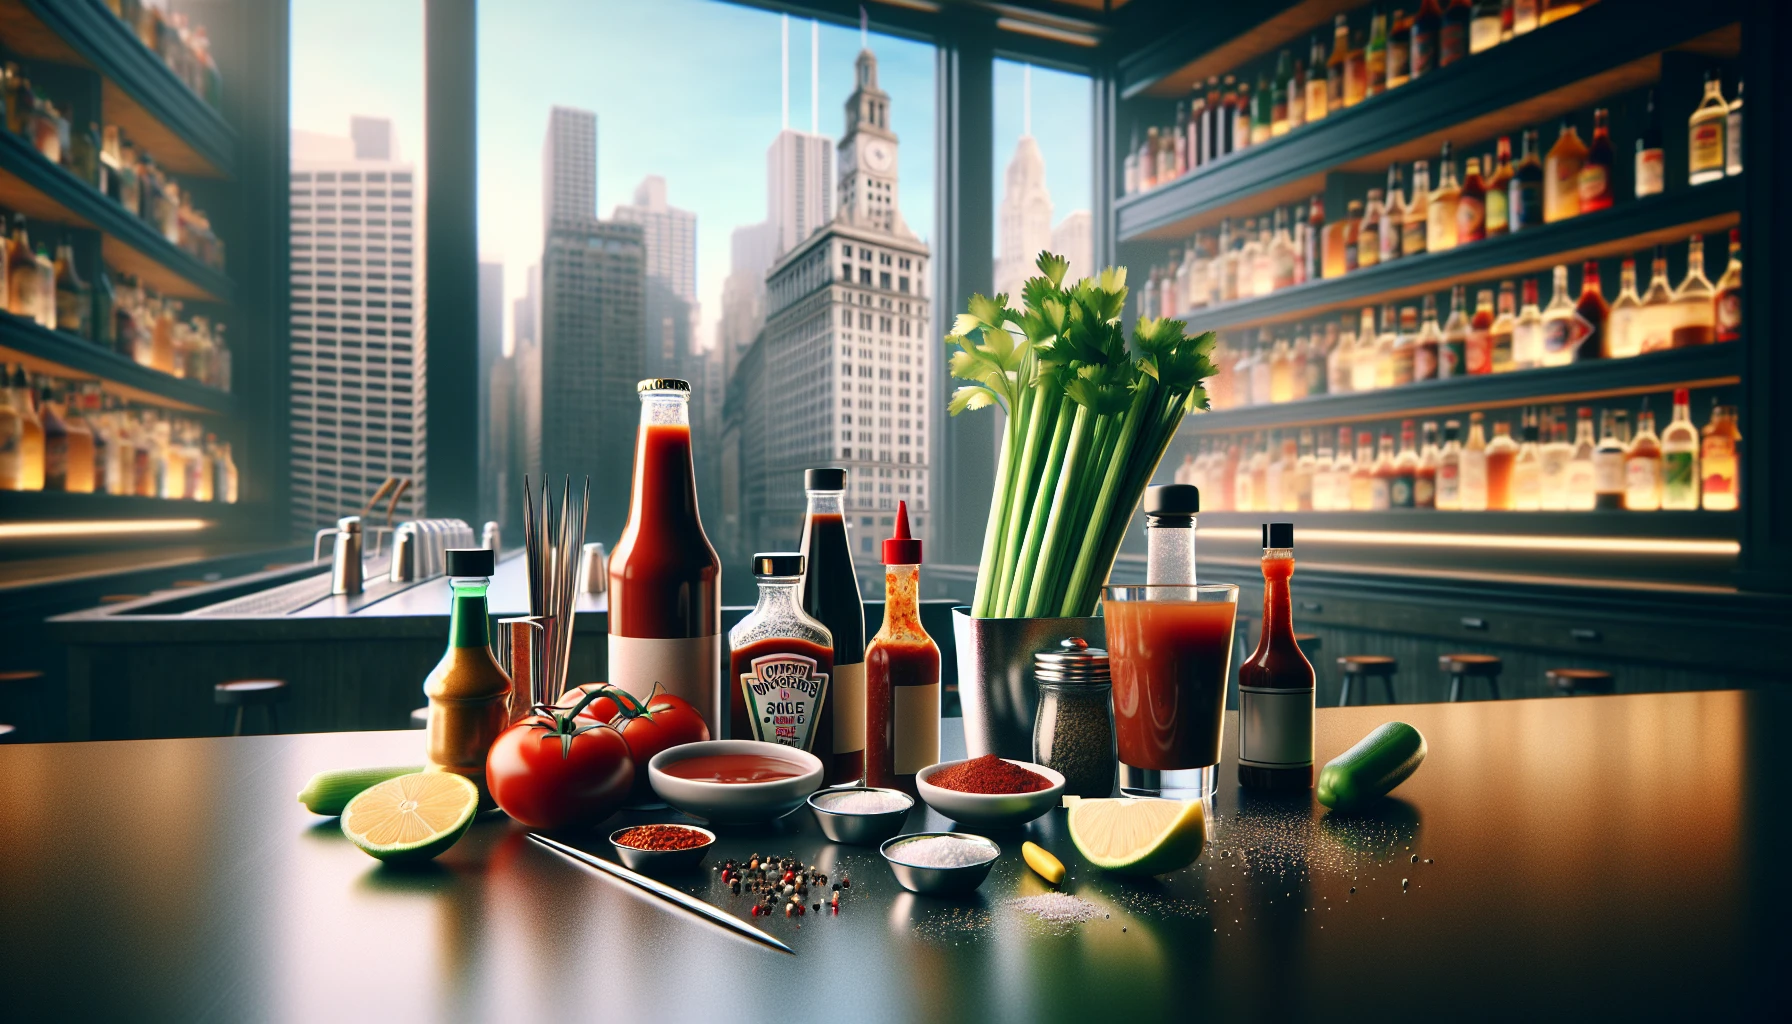 Bloody Mary ingredients in Chicago: A wild cocktail chase!